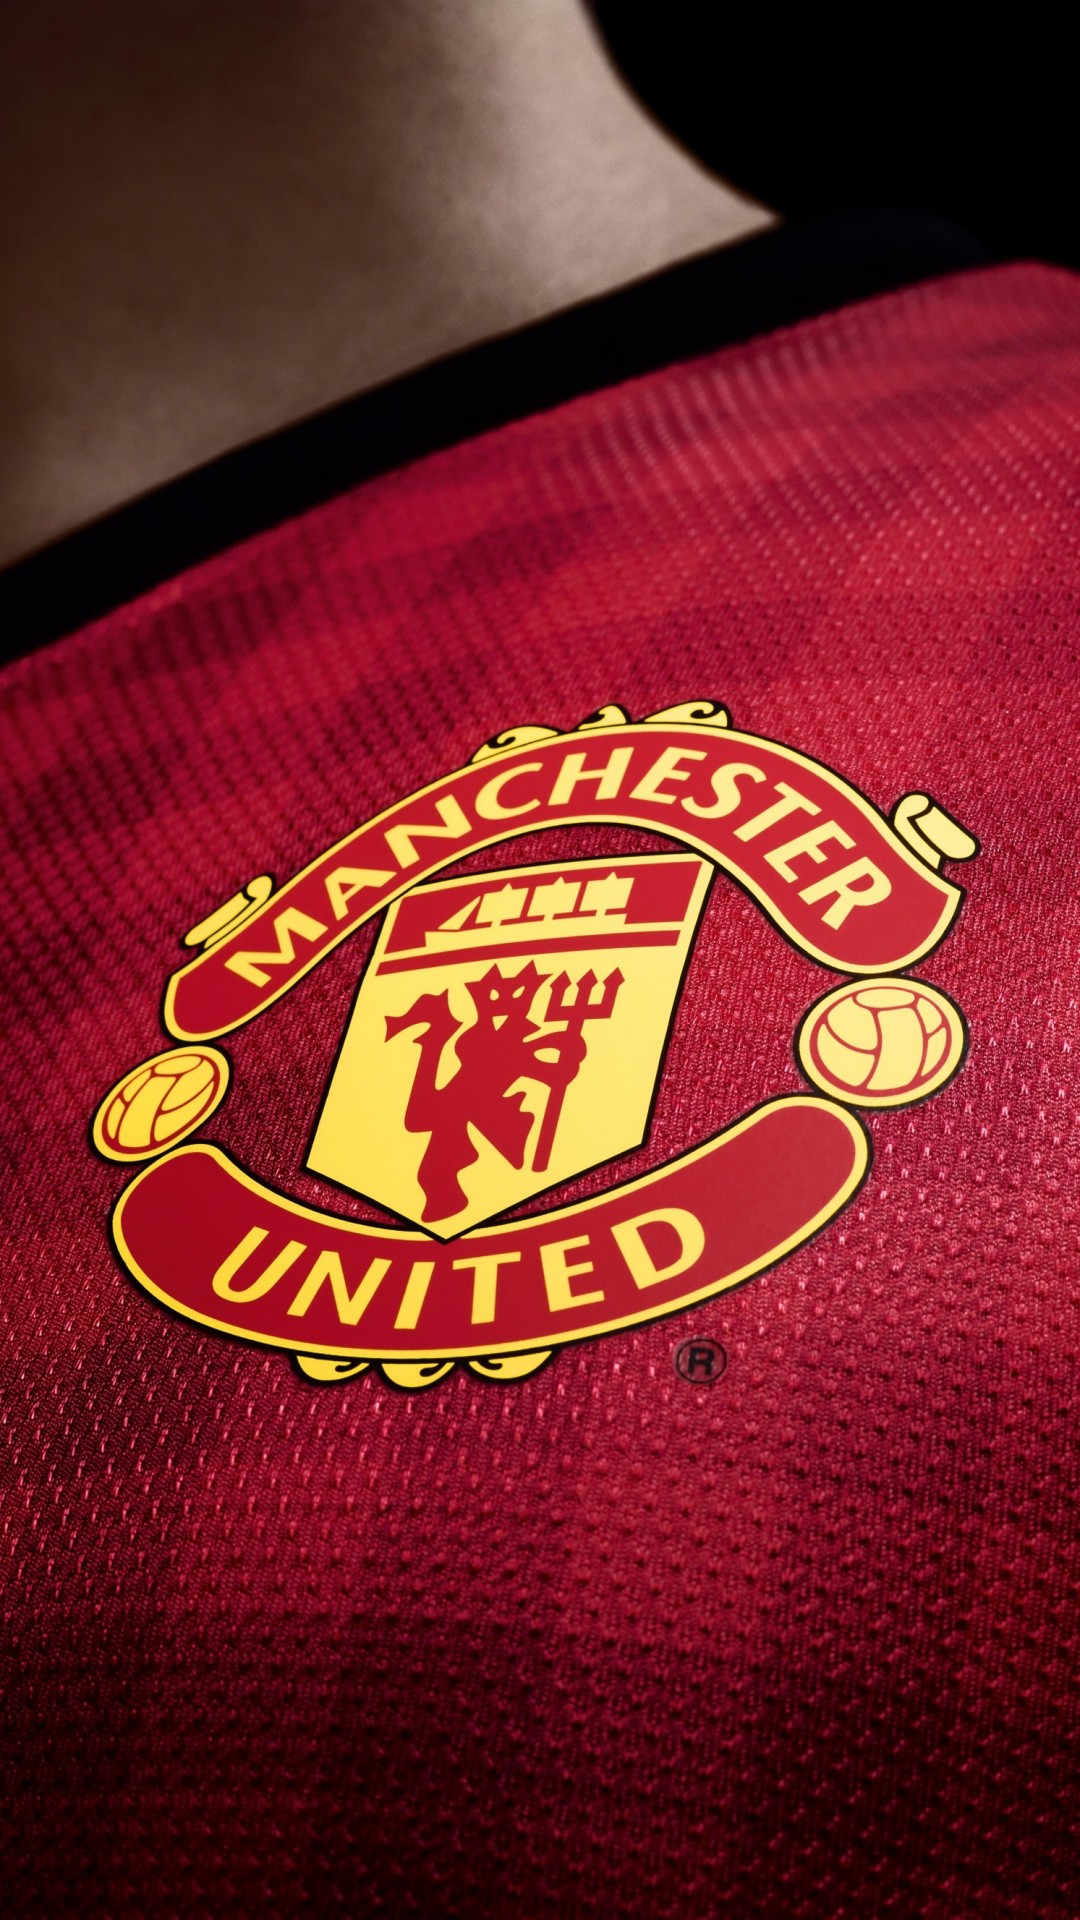 Manchester United Logo Shirt Wallpaper for SONY Xperia Z2